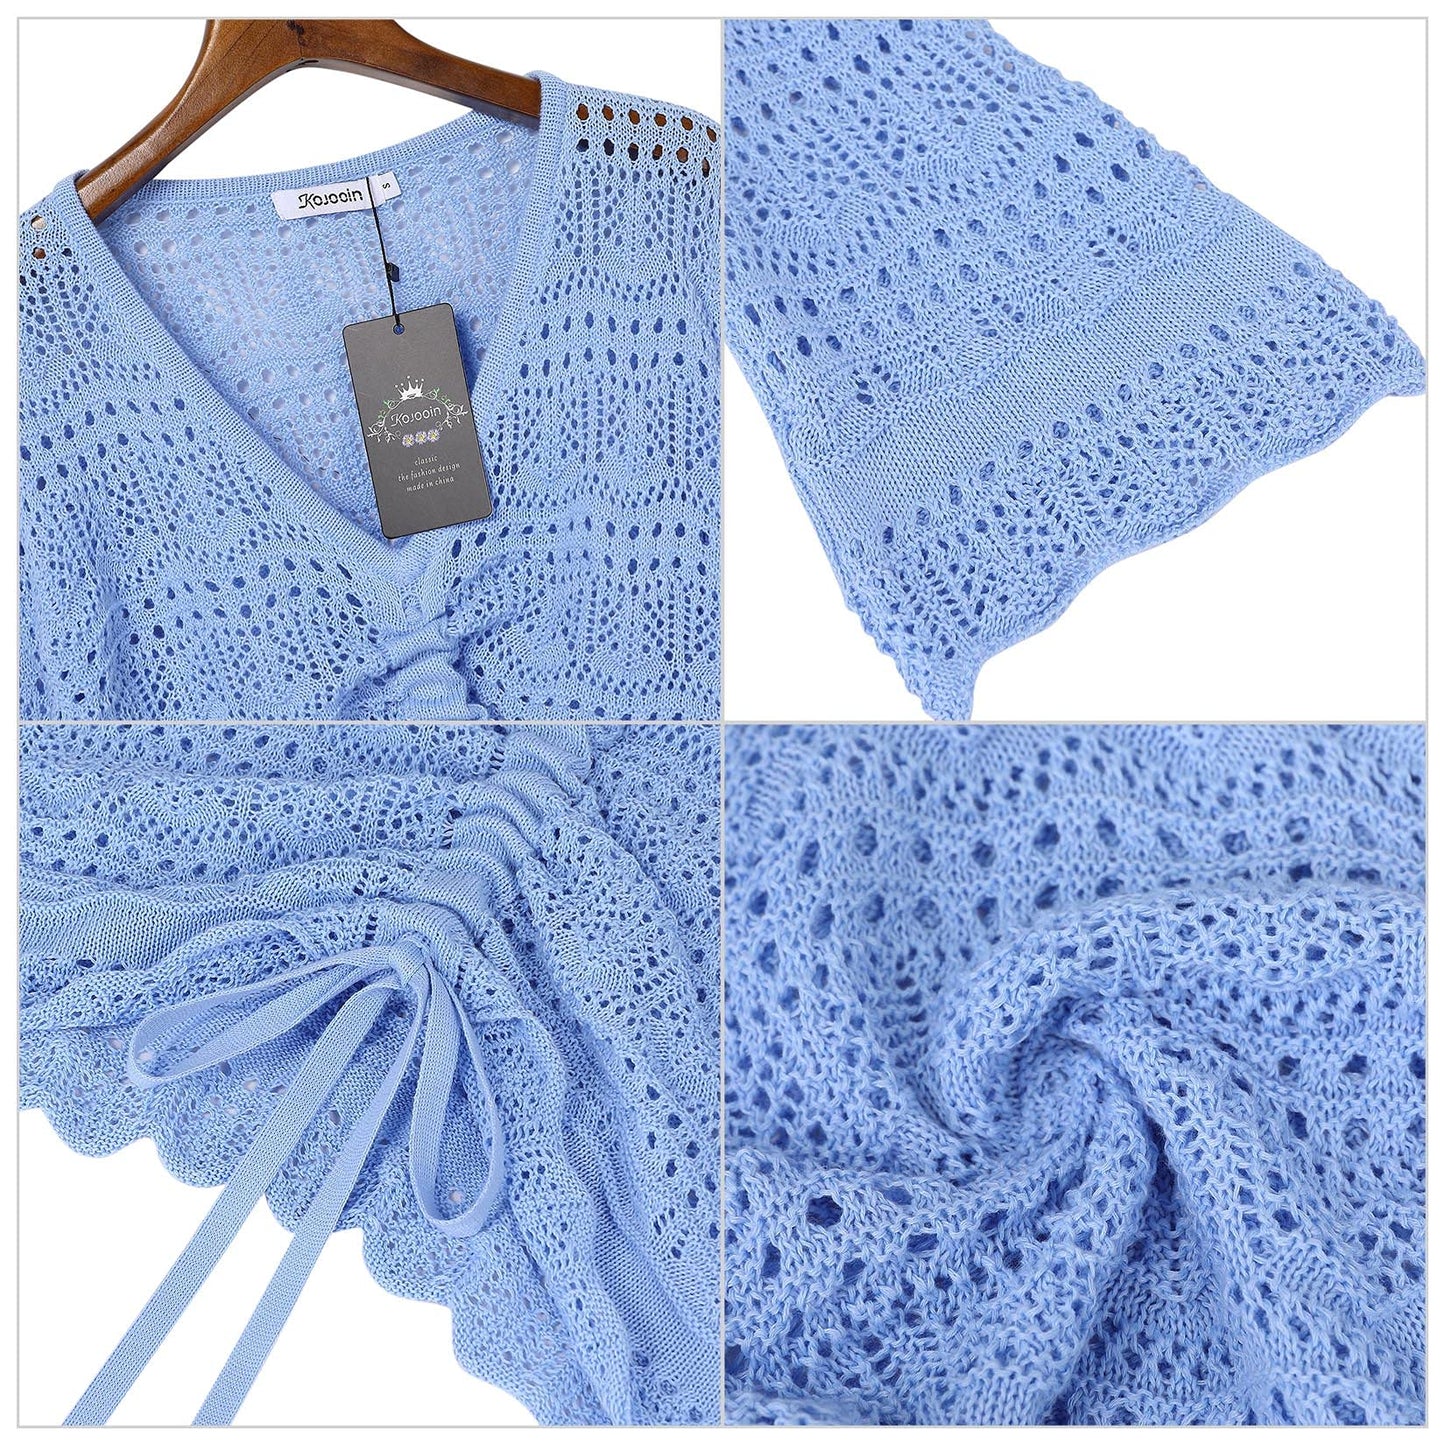 YESFASHION Drawstring Knitted Blouse Women Adjustable Crochet Tops Blue